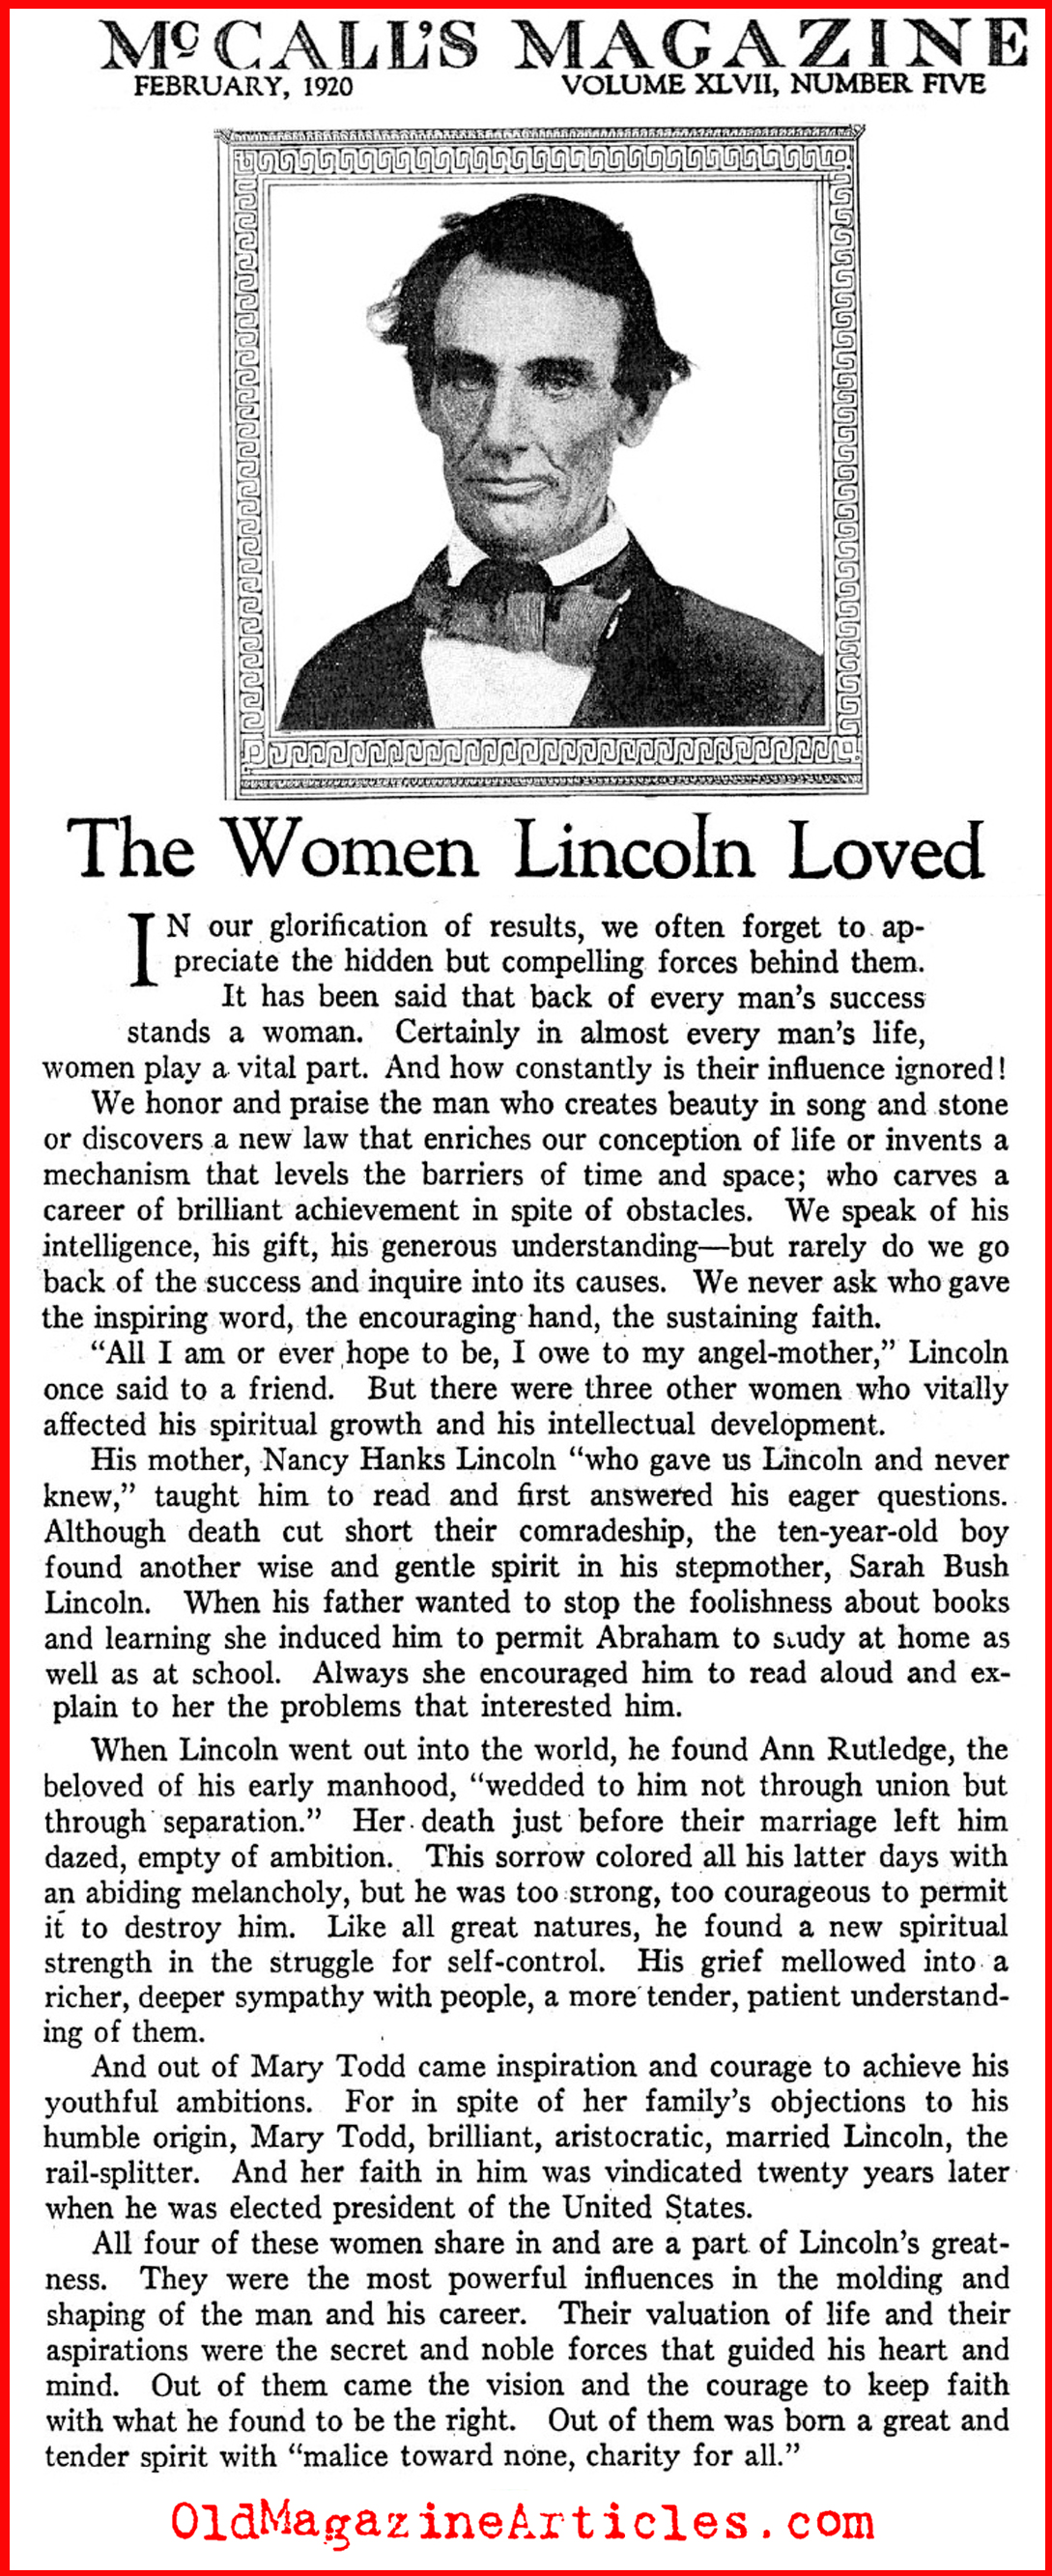 The Women Lincoln Loved  (McCall's Magazine, 1920)